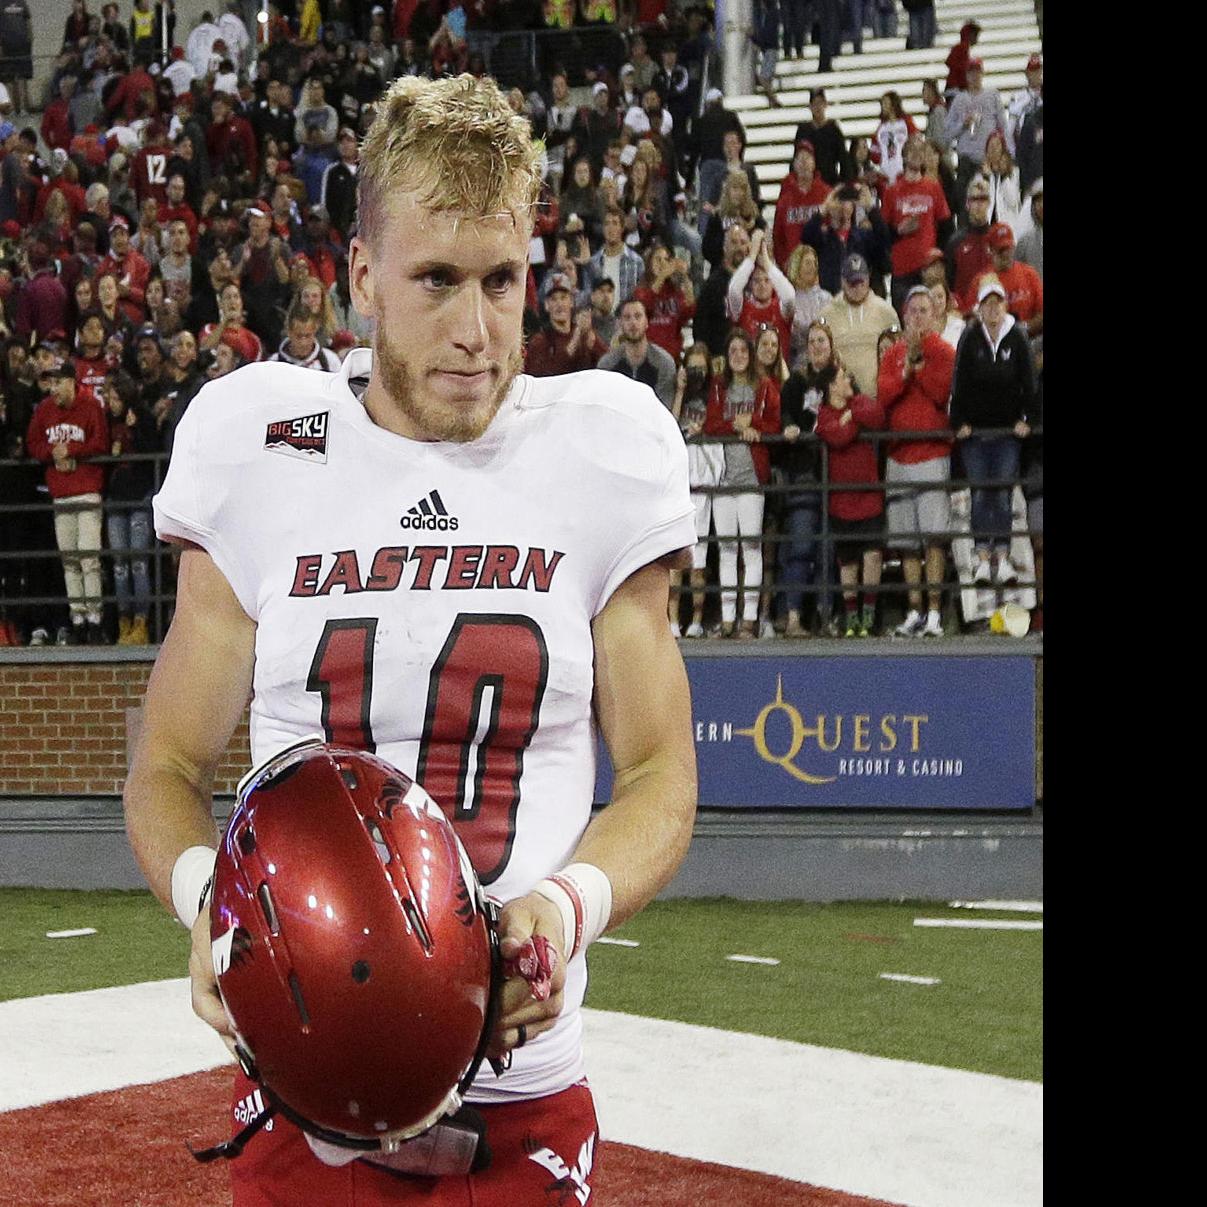 Cooper Kupp named FCS player of the decade